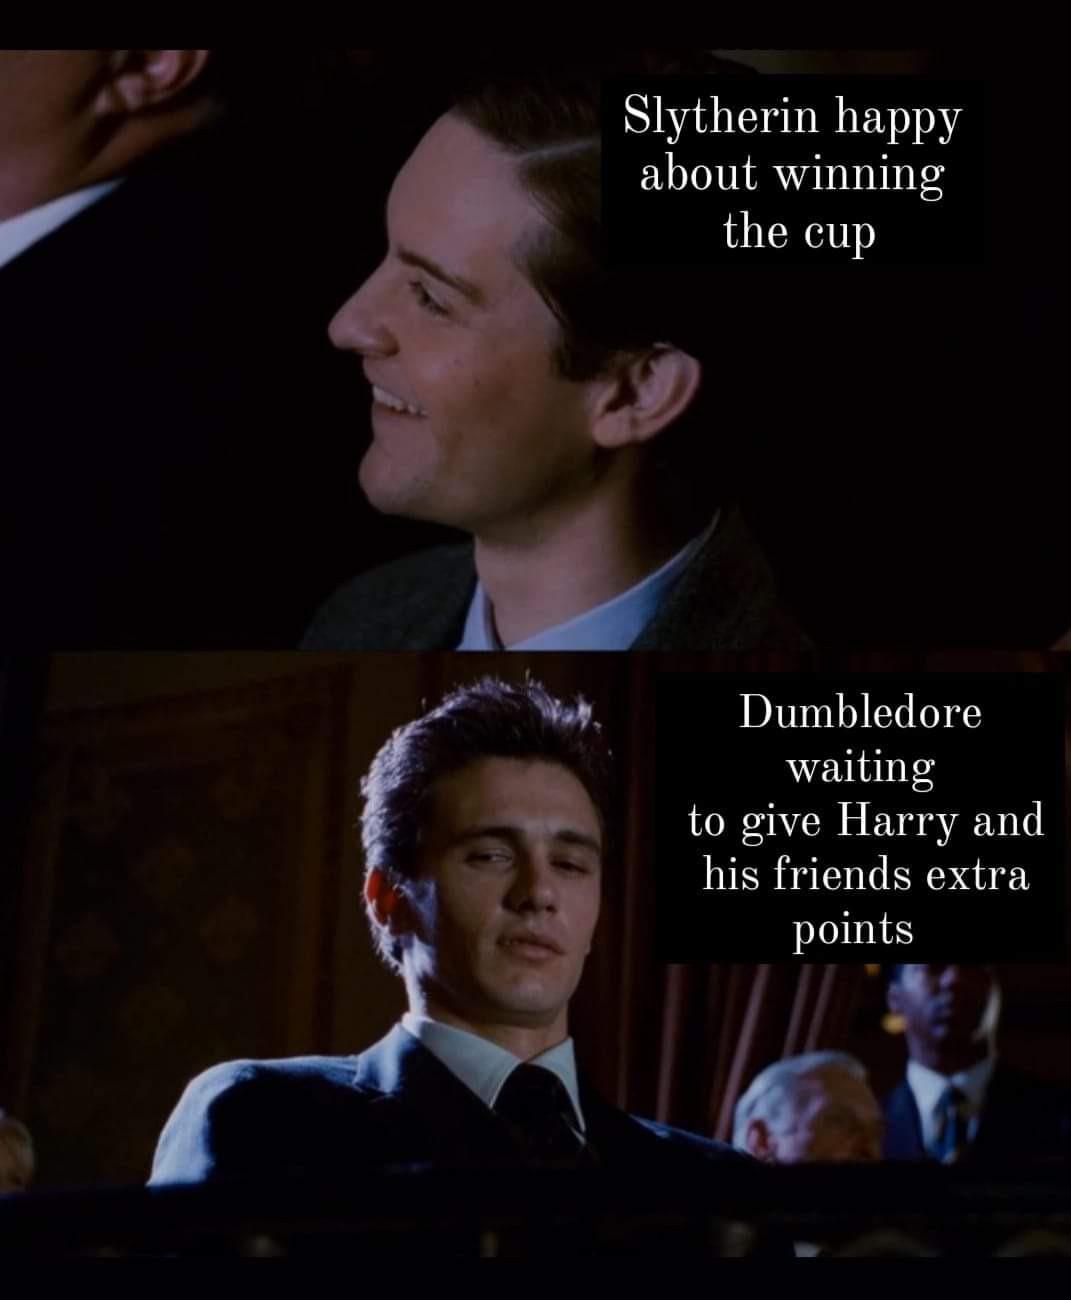 let's play raid shadow legends meme - Slytherin happy about winning the cup Dumbledore waiting to give Harry and his friends extra points